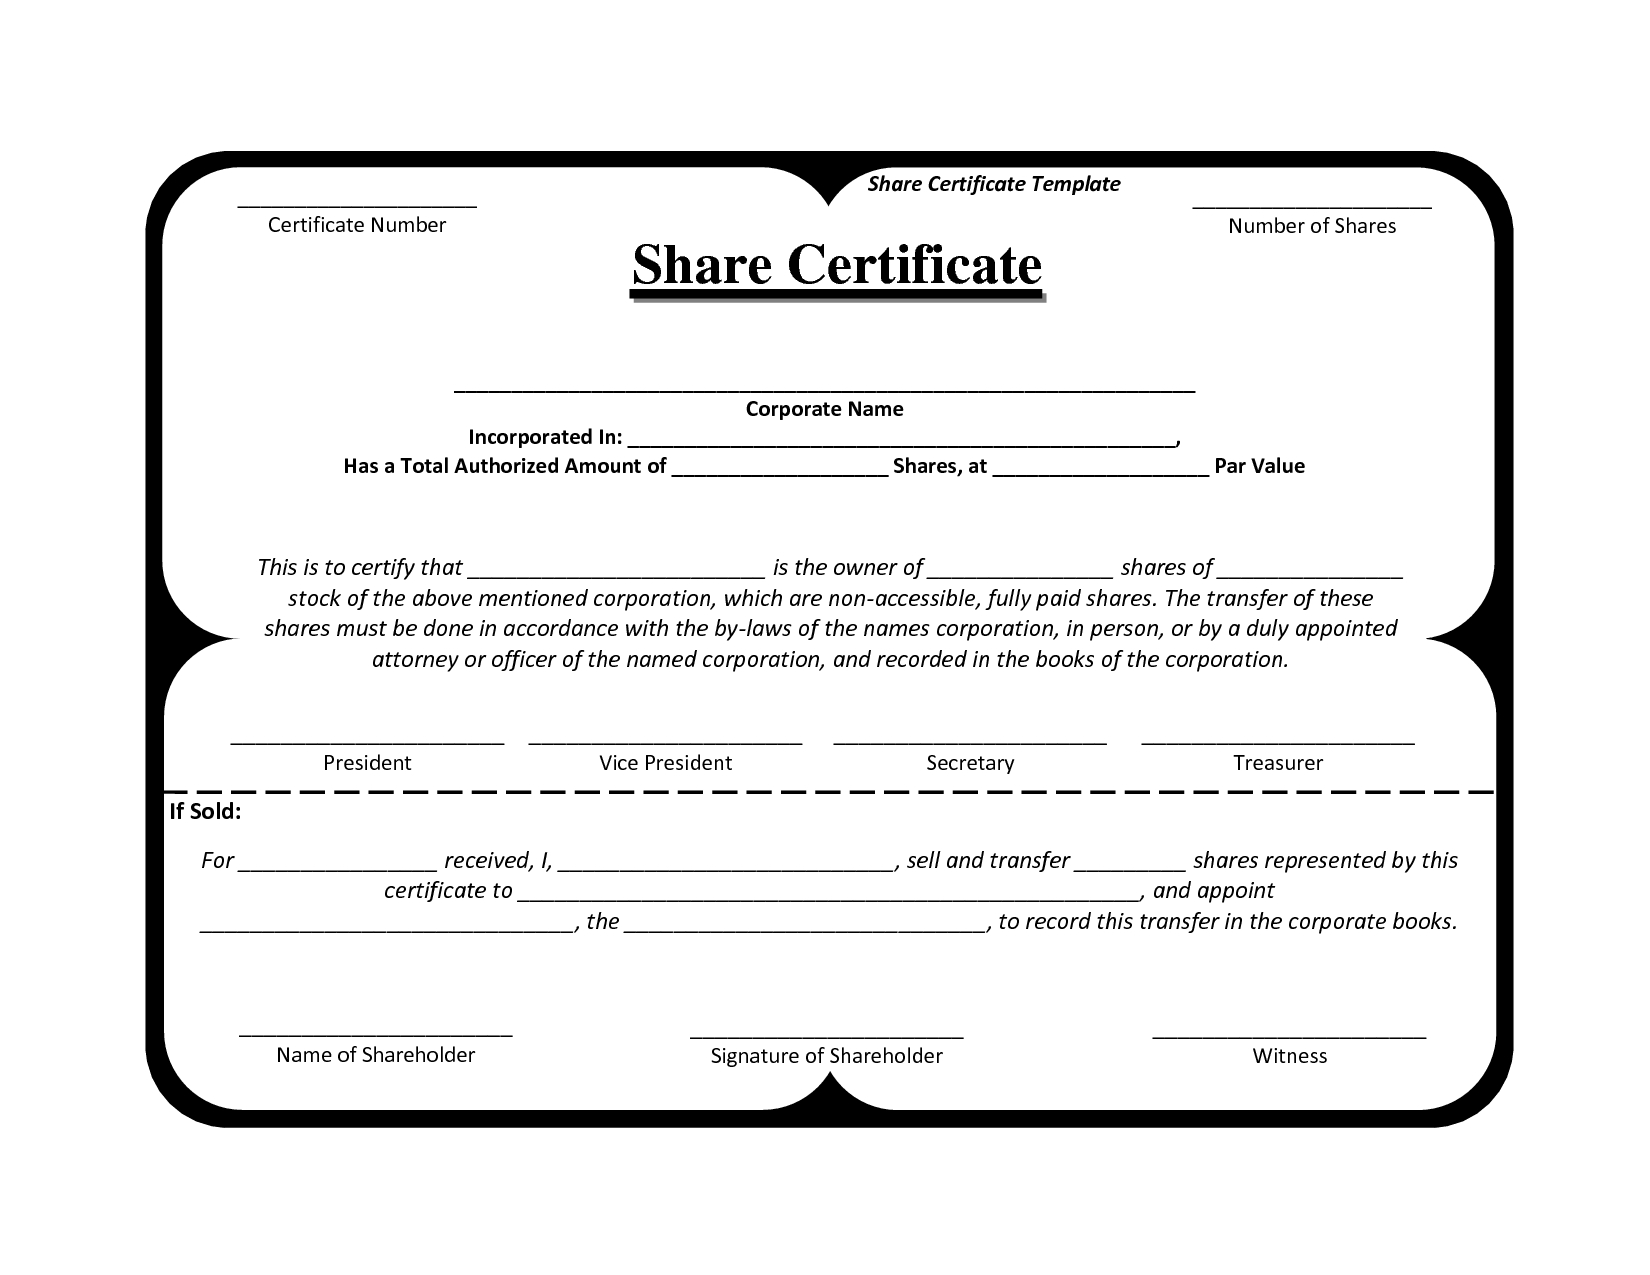 Template Share Certificate Rbscqi9V In 2019 | Certificate For Template Of Share Certificate